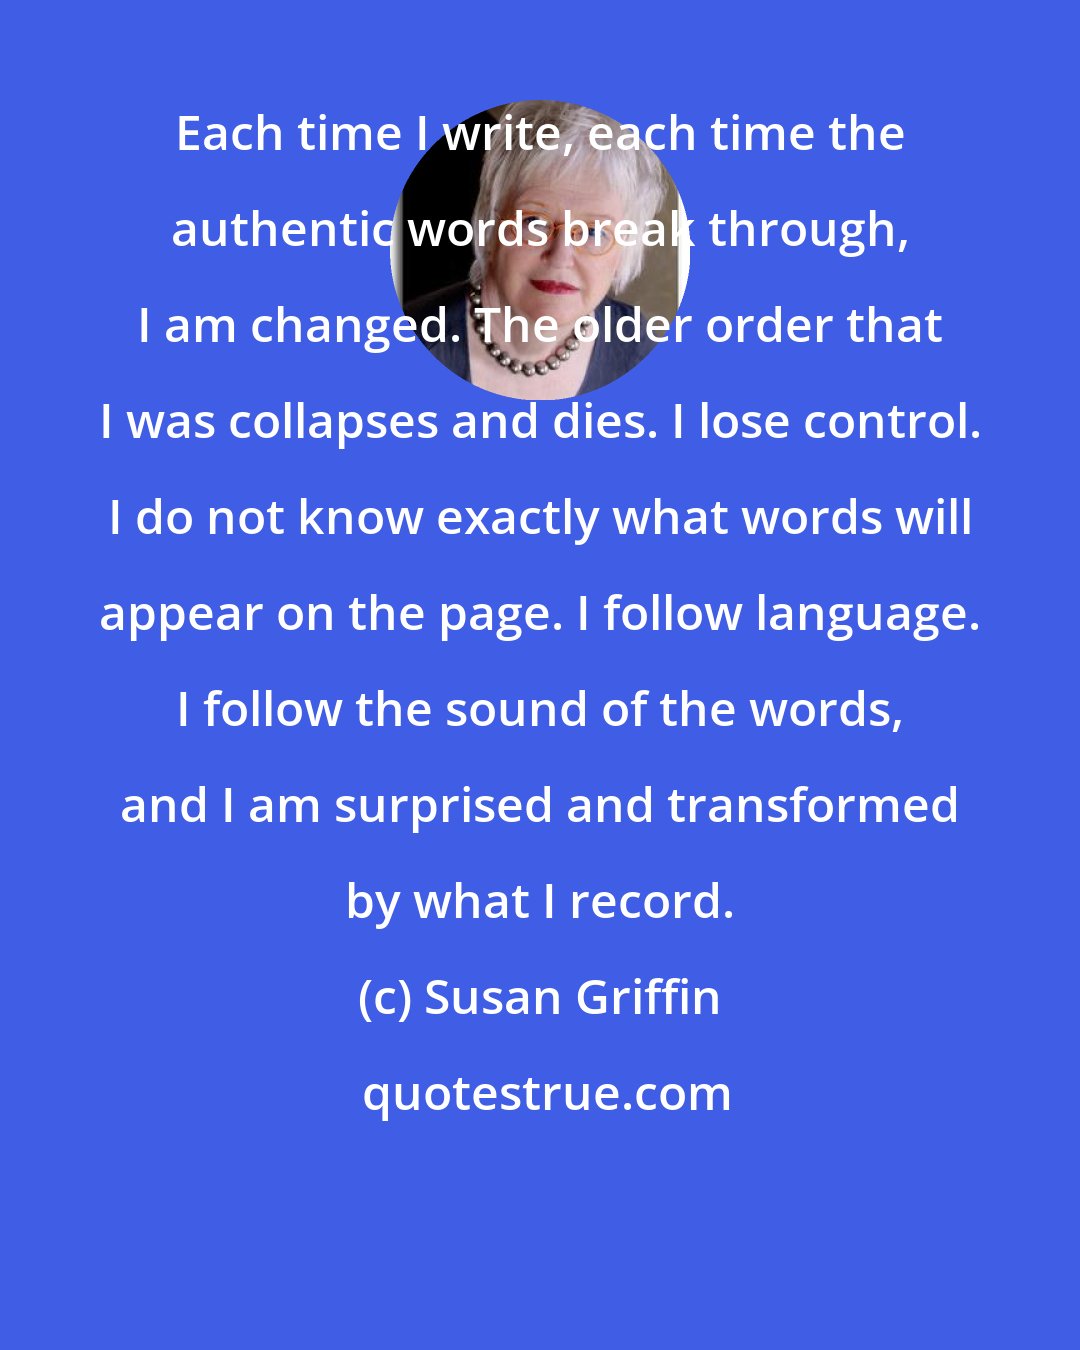 Susan Griffin: Each time I write, each time the authentic words break through, I am changed. The older order that I was collapses and dies. I lose control. I do not know exactly what words will appear on the page. I follow language. I follow the sound of the words, and I am surprised and transformed by what I record.